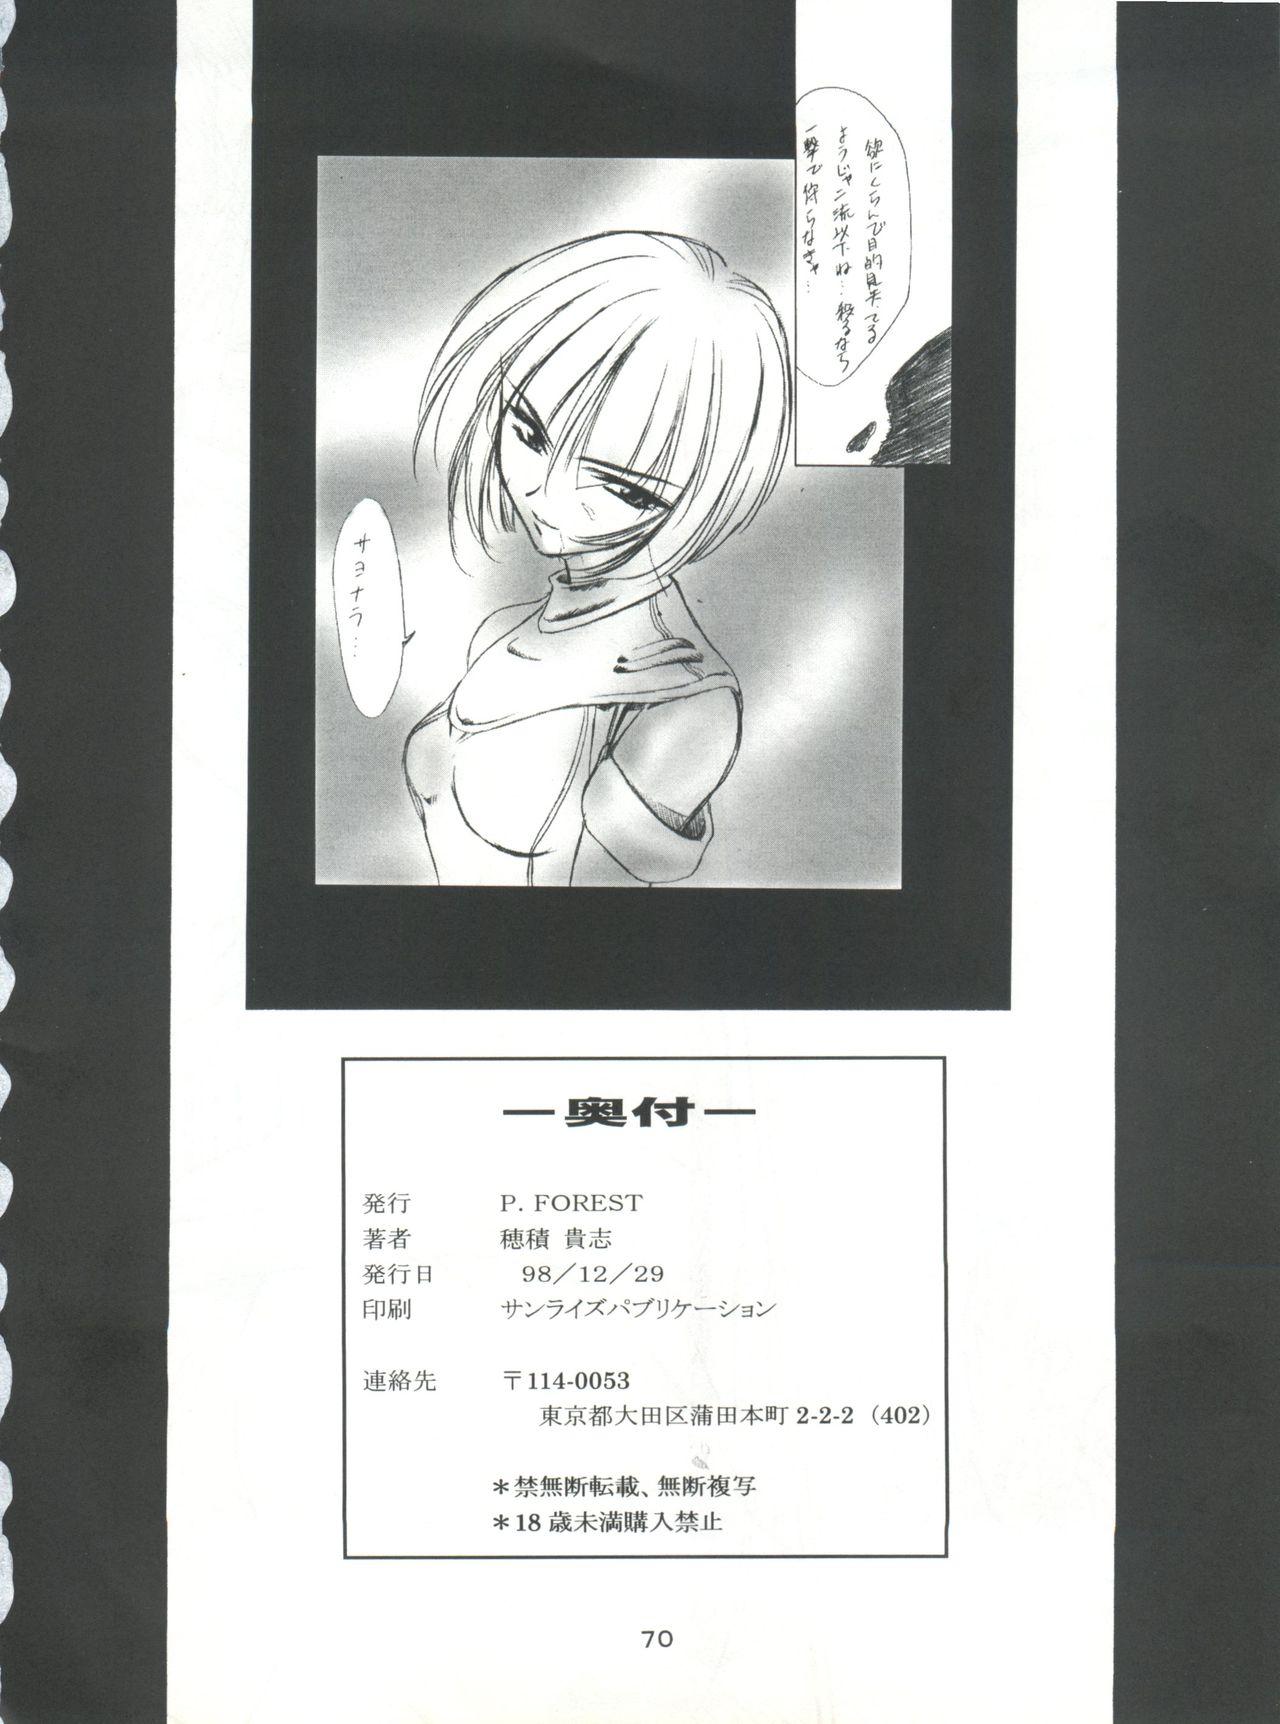 Chubby Boys and Girls - White album Kare kano Chunky - Page 70